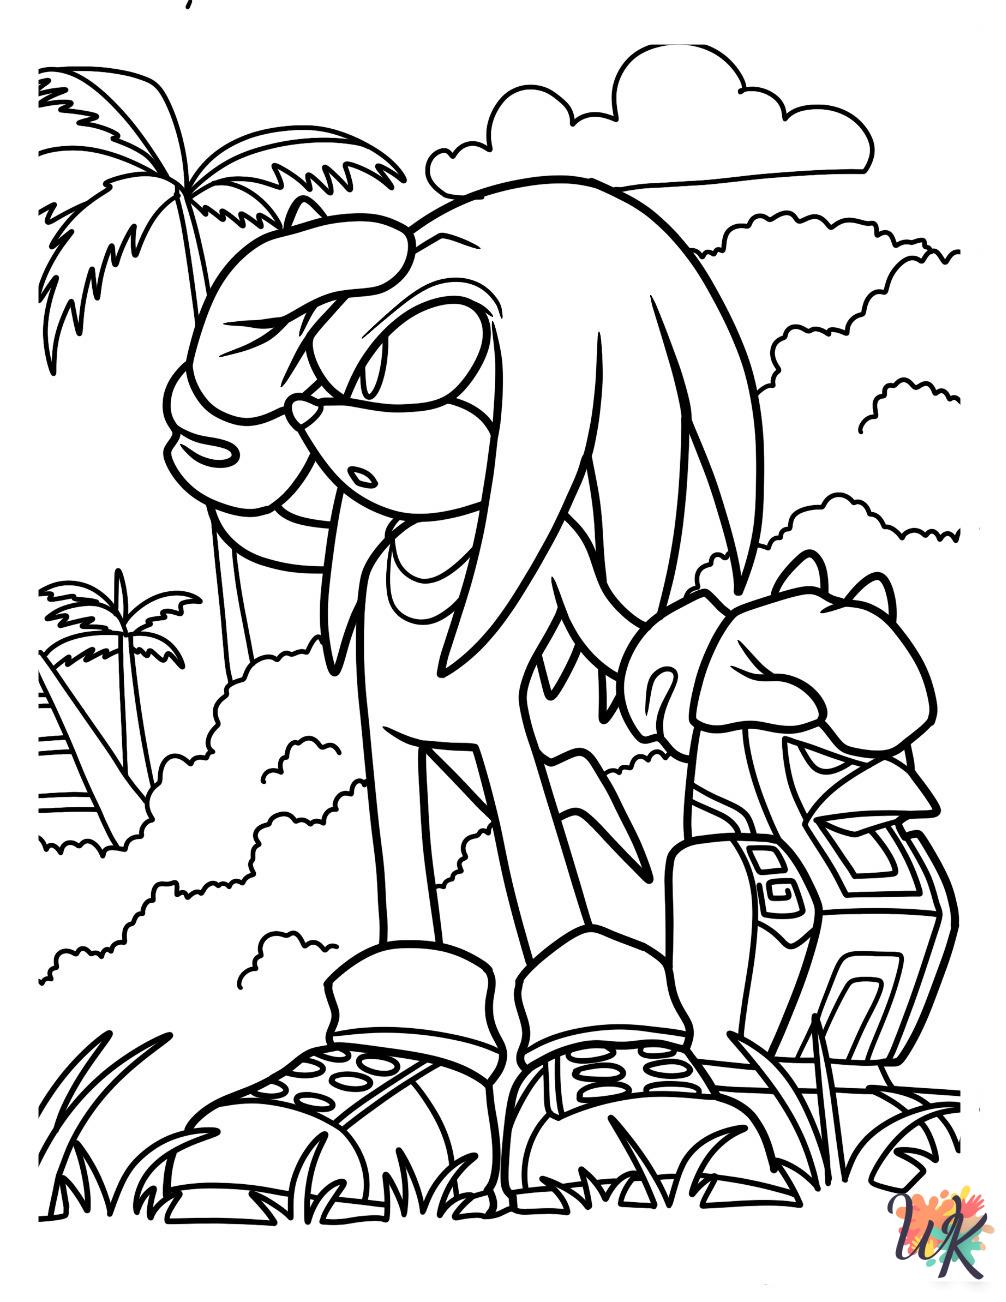 Knuckles coloring pages easy